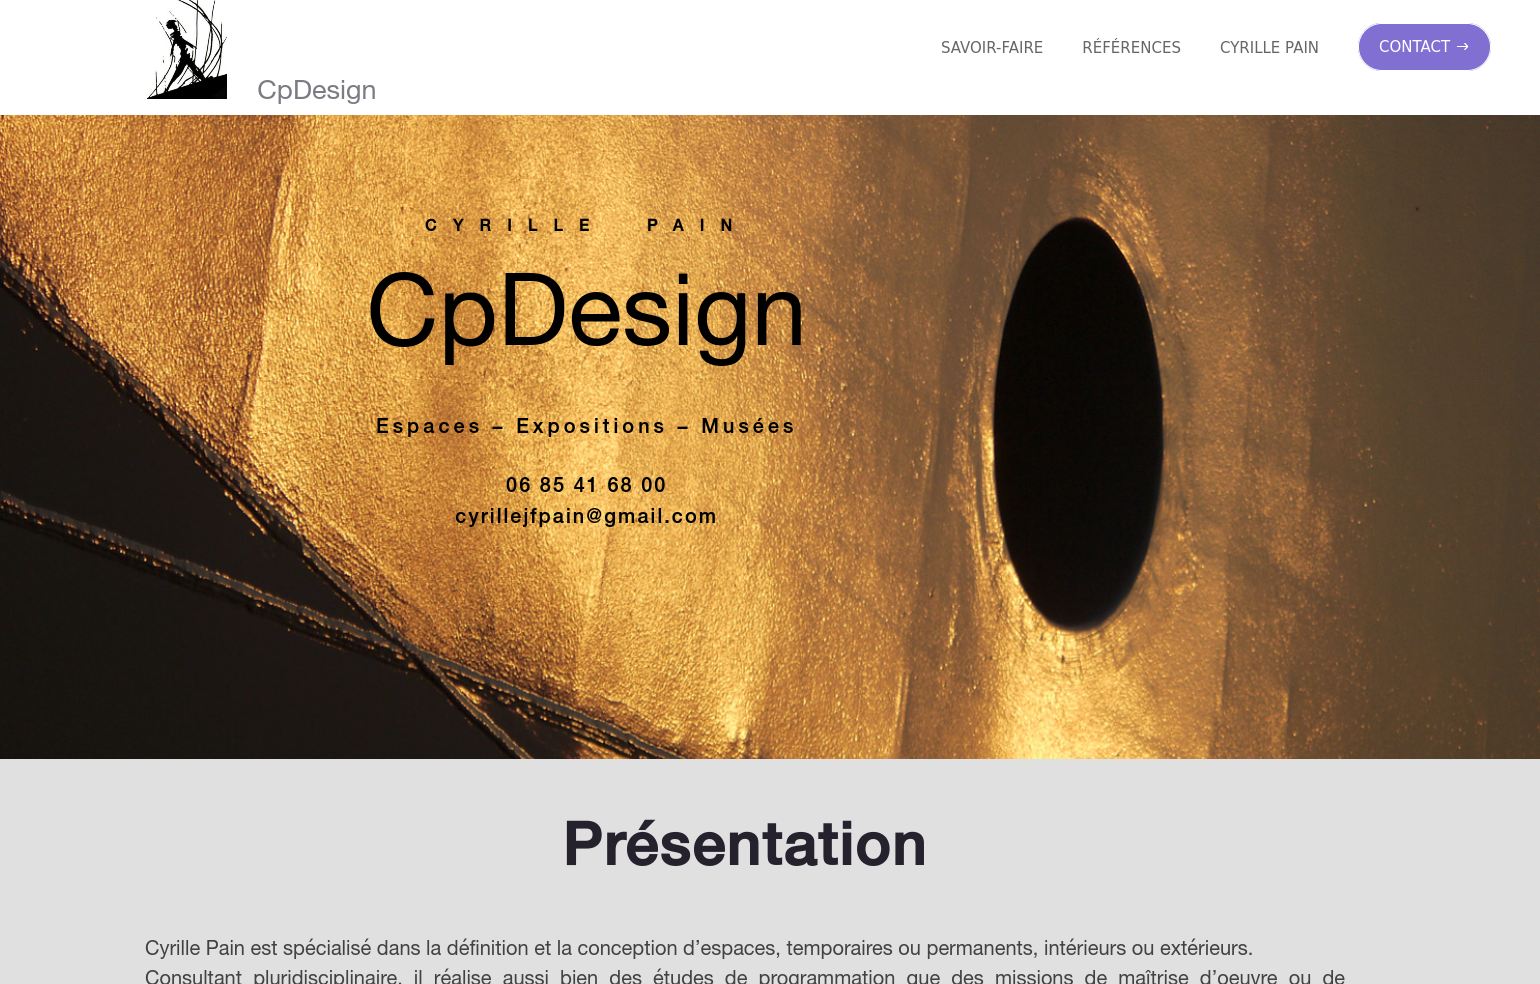 CpDesign